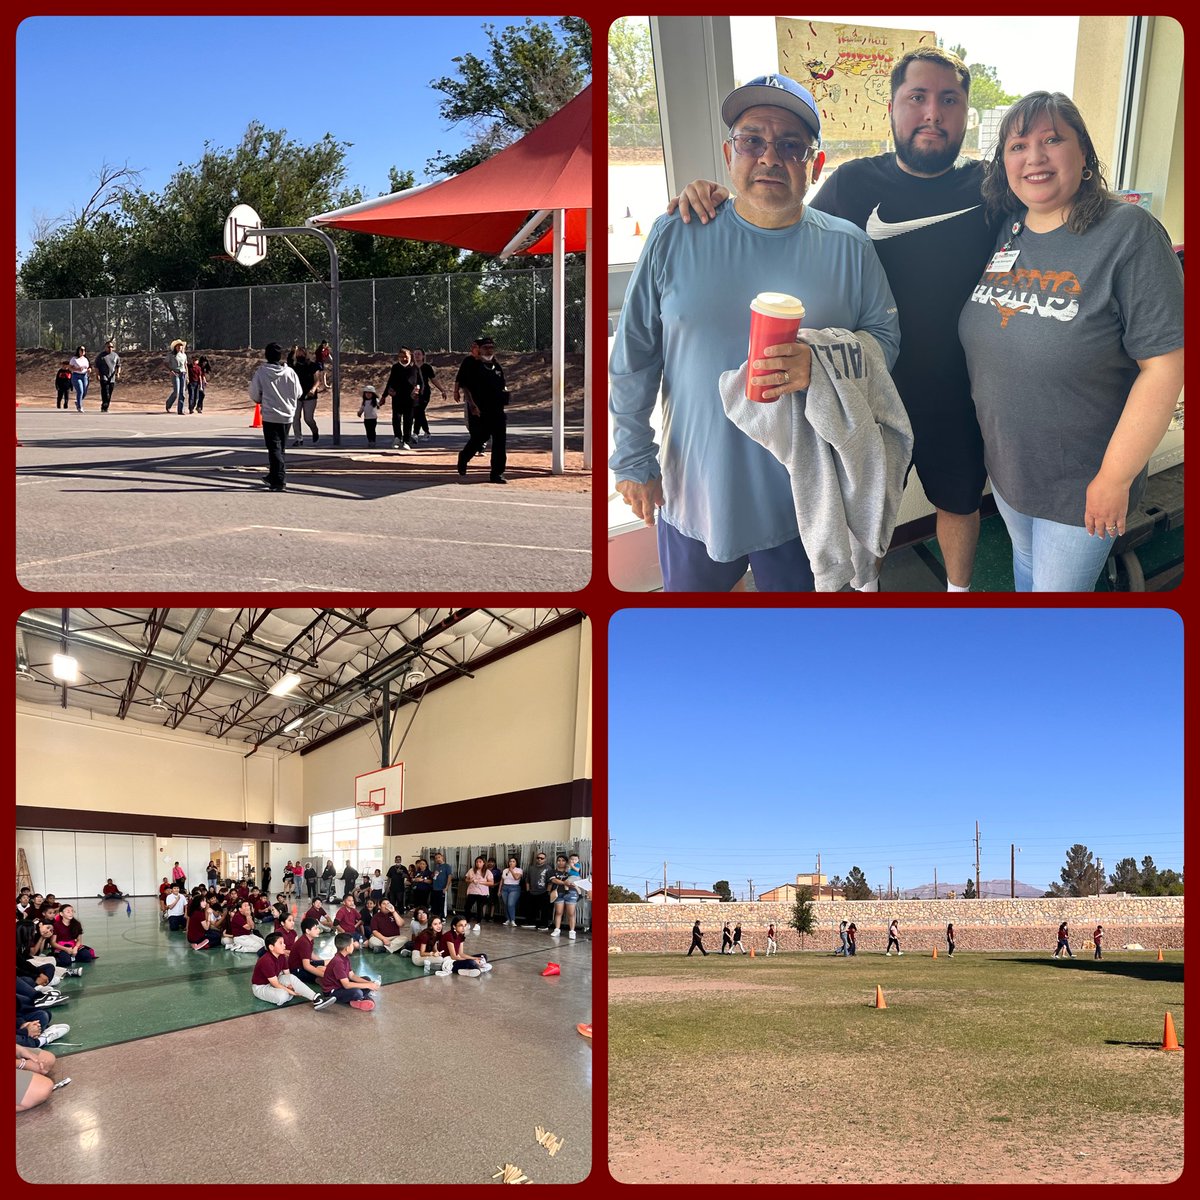 Thank you to all our YES parents, students, faculty & staff for making our last 🏃🏻‍♀️Walkman Wednesday 🏃🏻an amazing event. Our Warriors got a taste of competition and went hard on their recruiting skills. #OneTribe #BowUp 🏹 @YsletaISD @_IreneAhumada @BrendaChR1